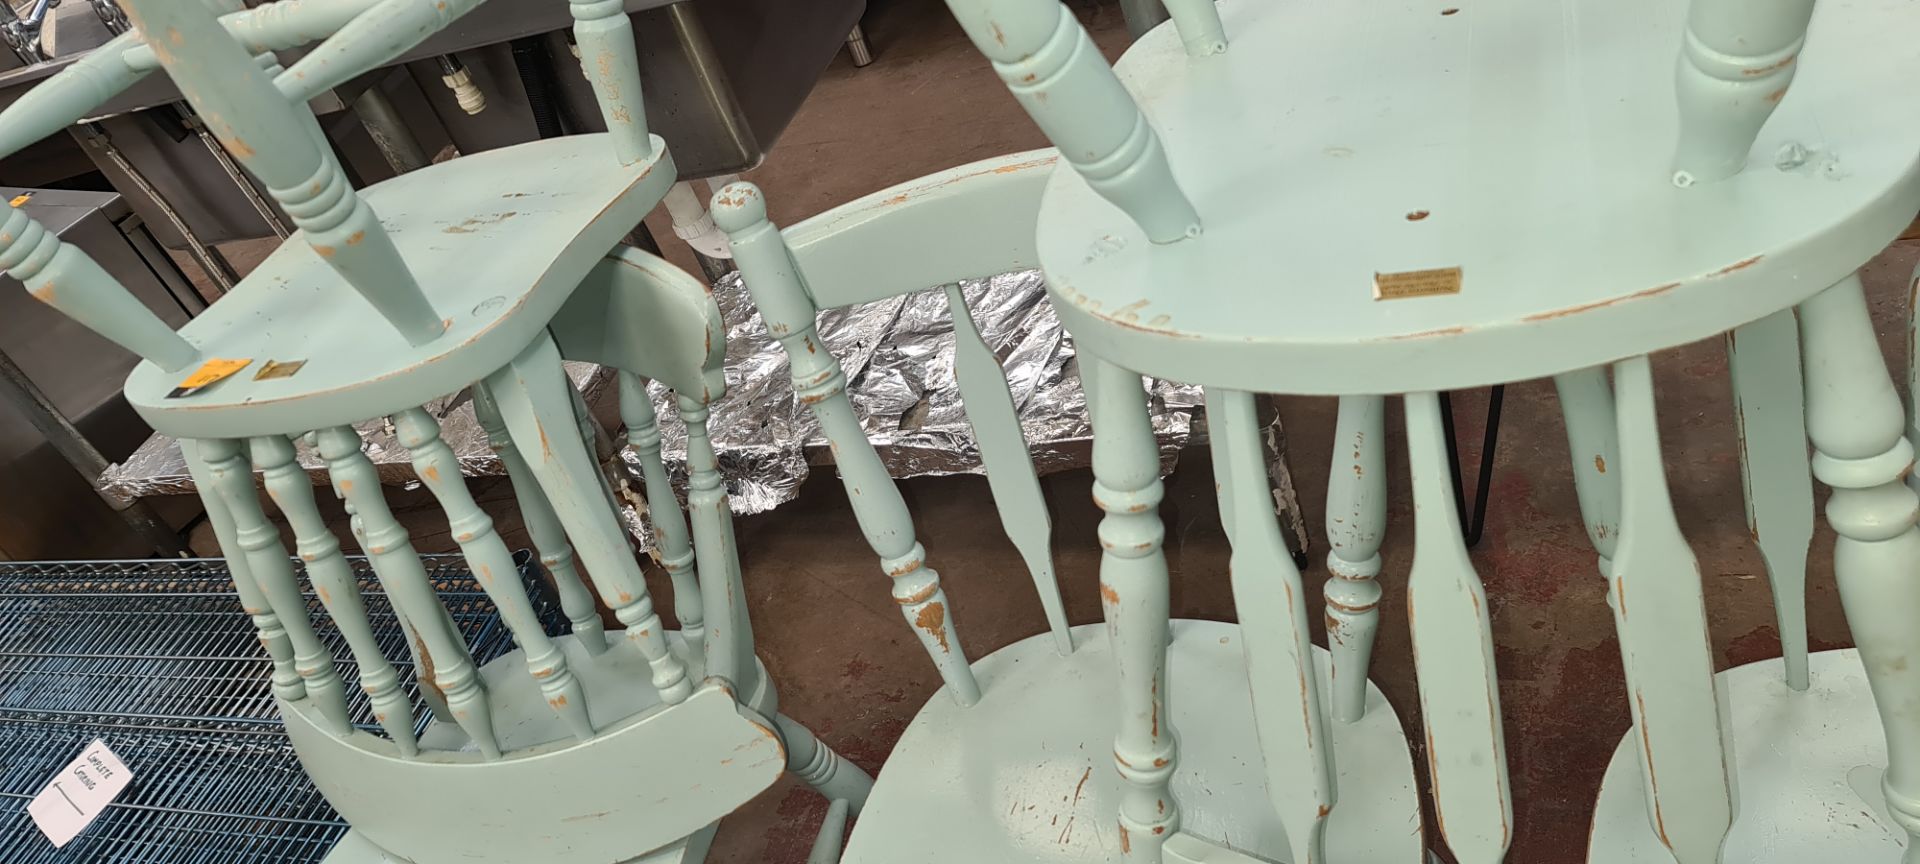 5 off pale blue painted dining chairs - Image 5 of 5